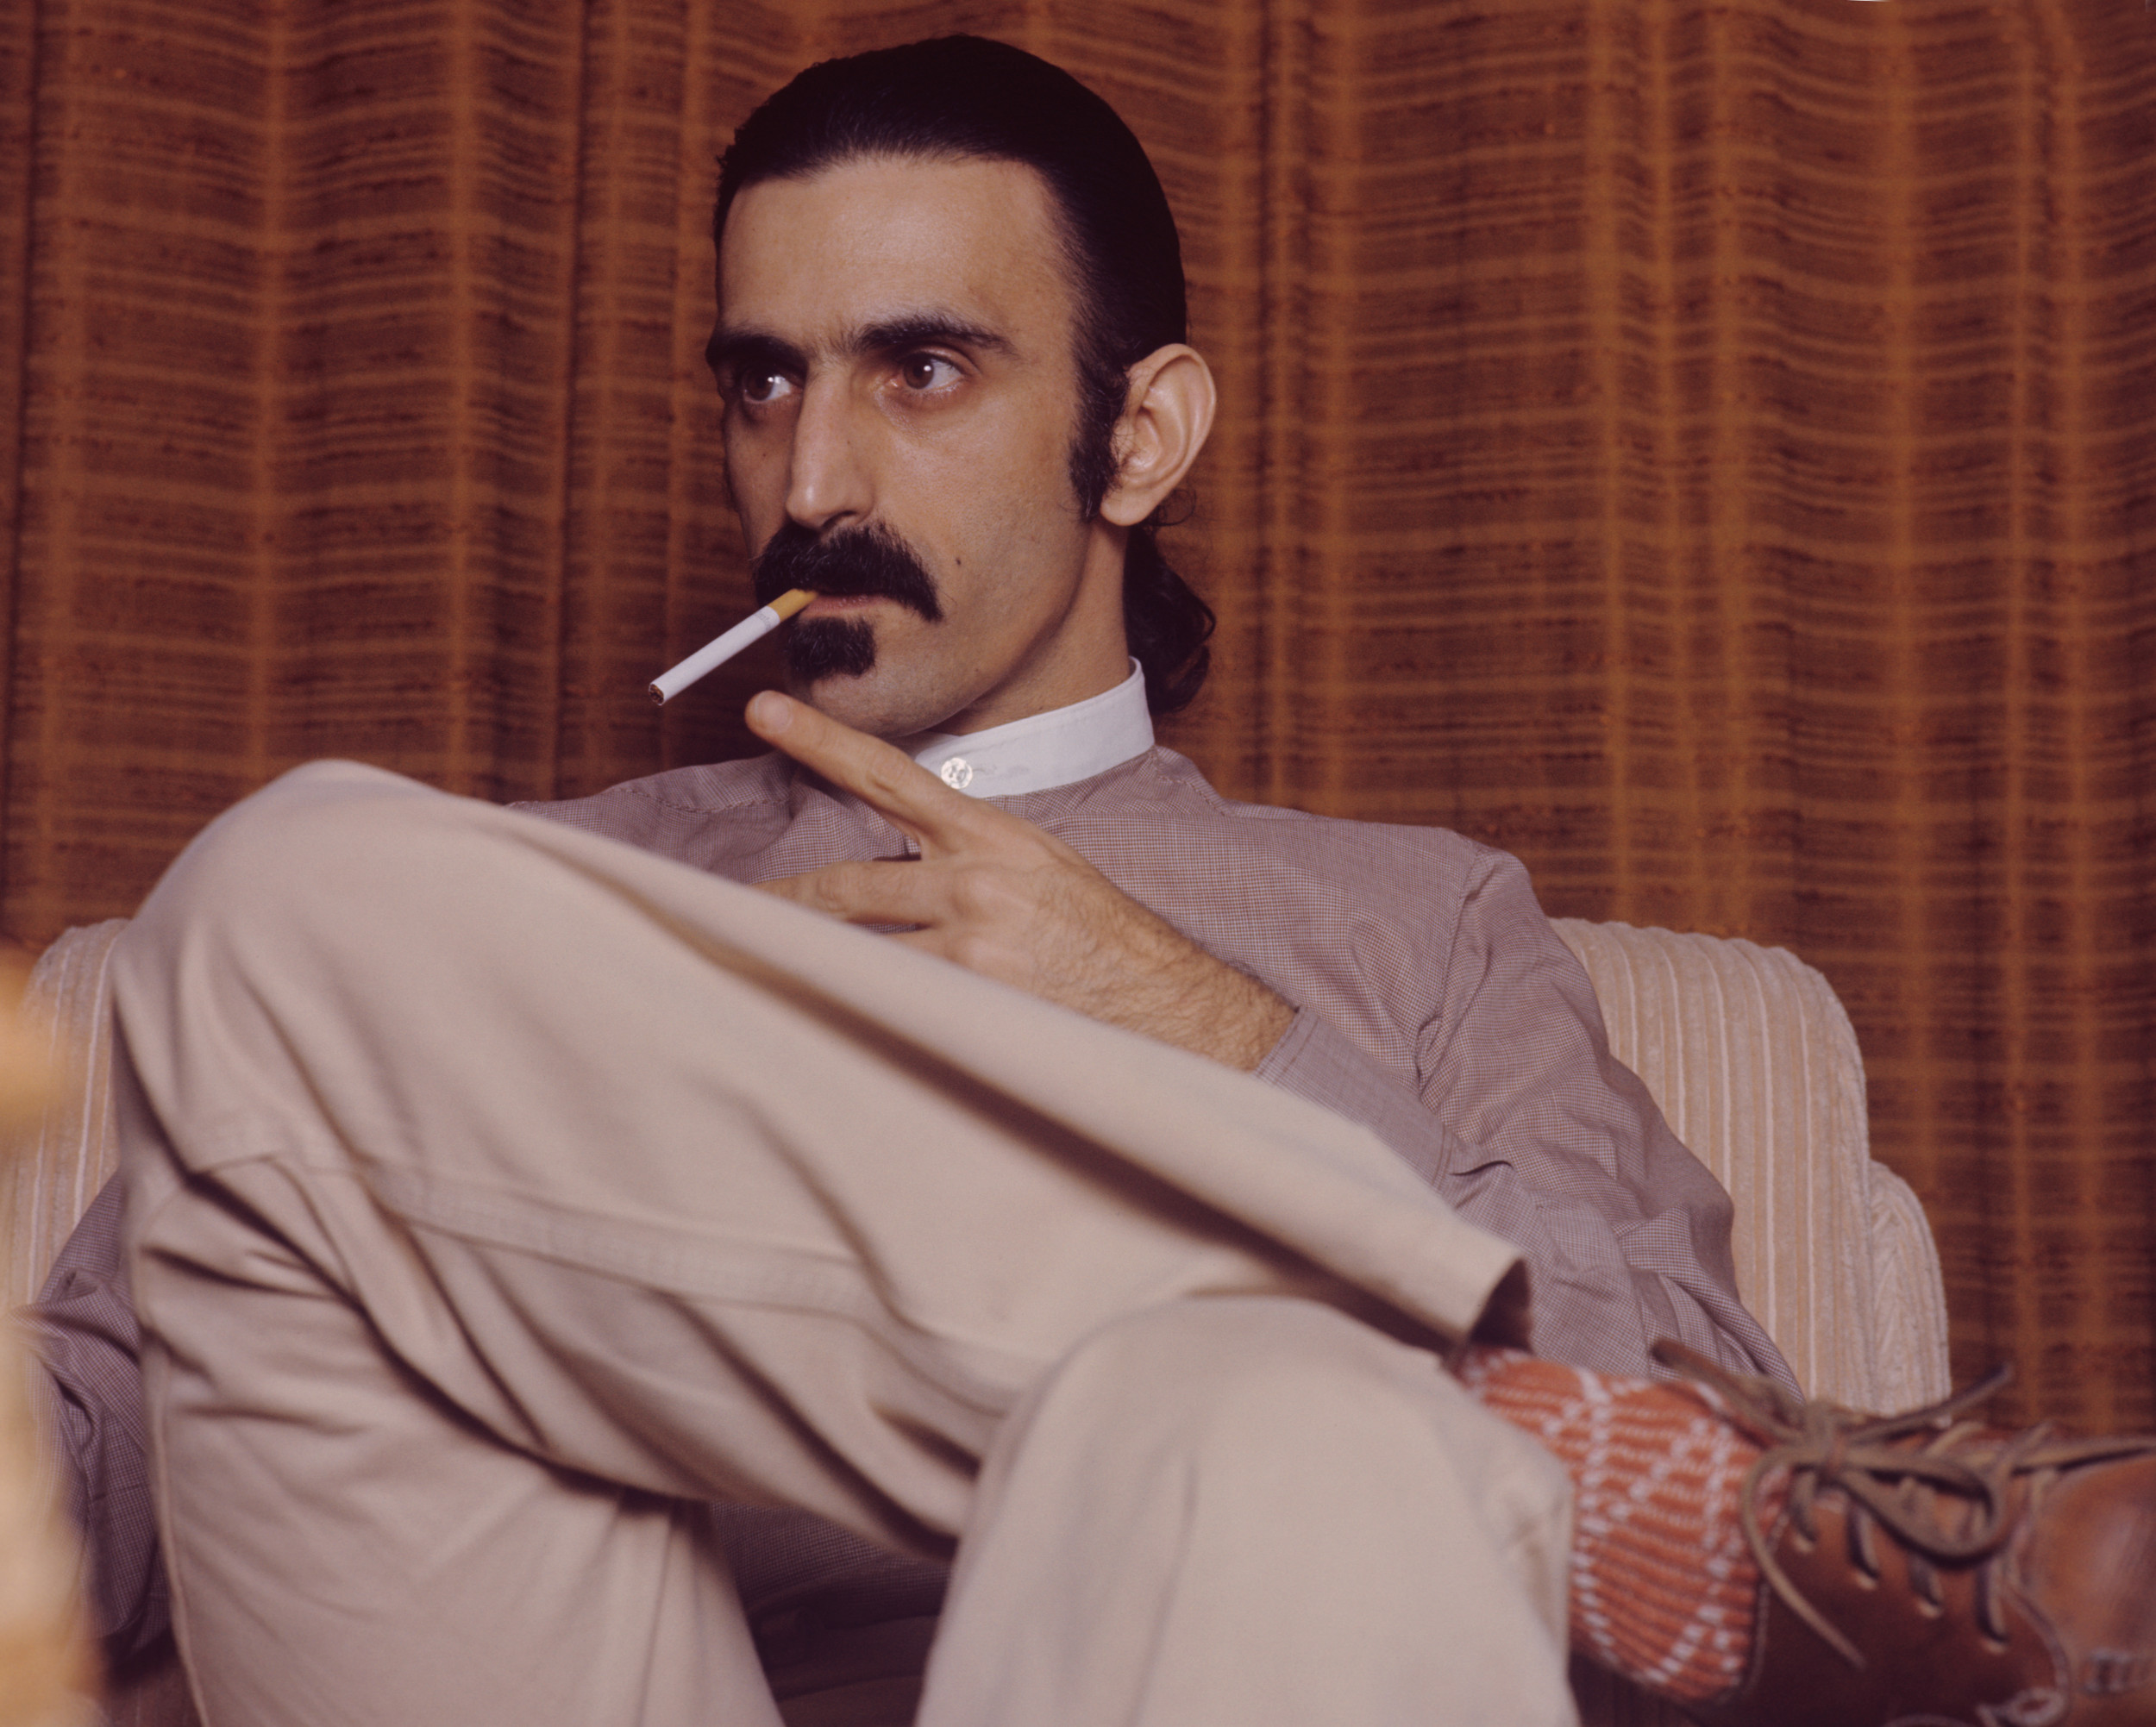 New Frank Zappa Box Set Contains Audio of When He Was Almost Killed by Fan